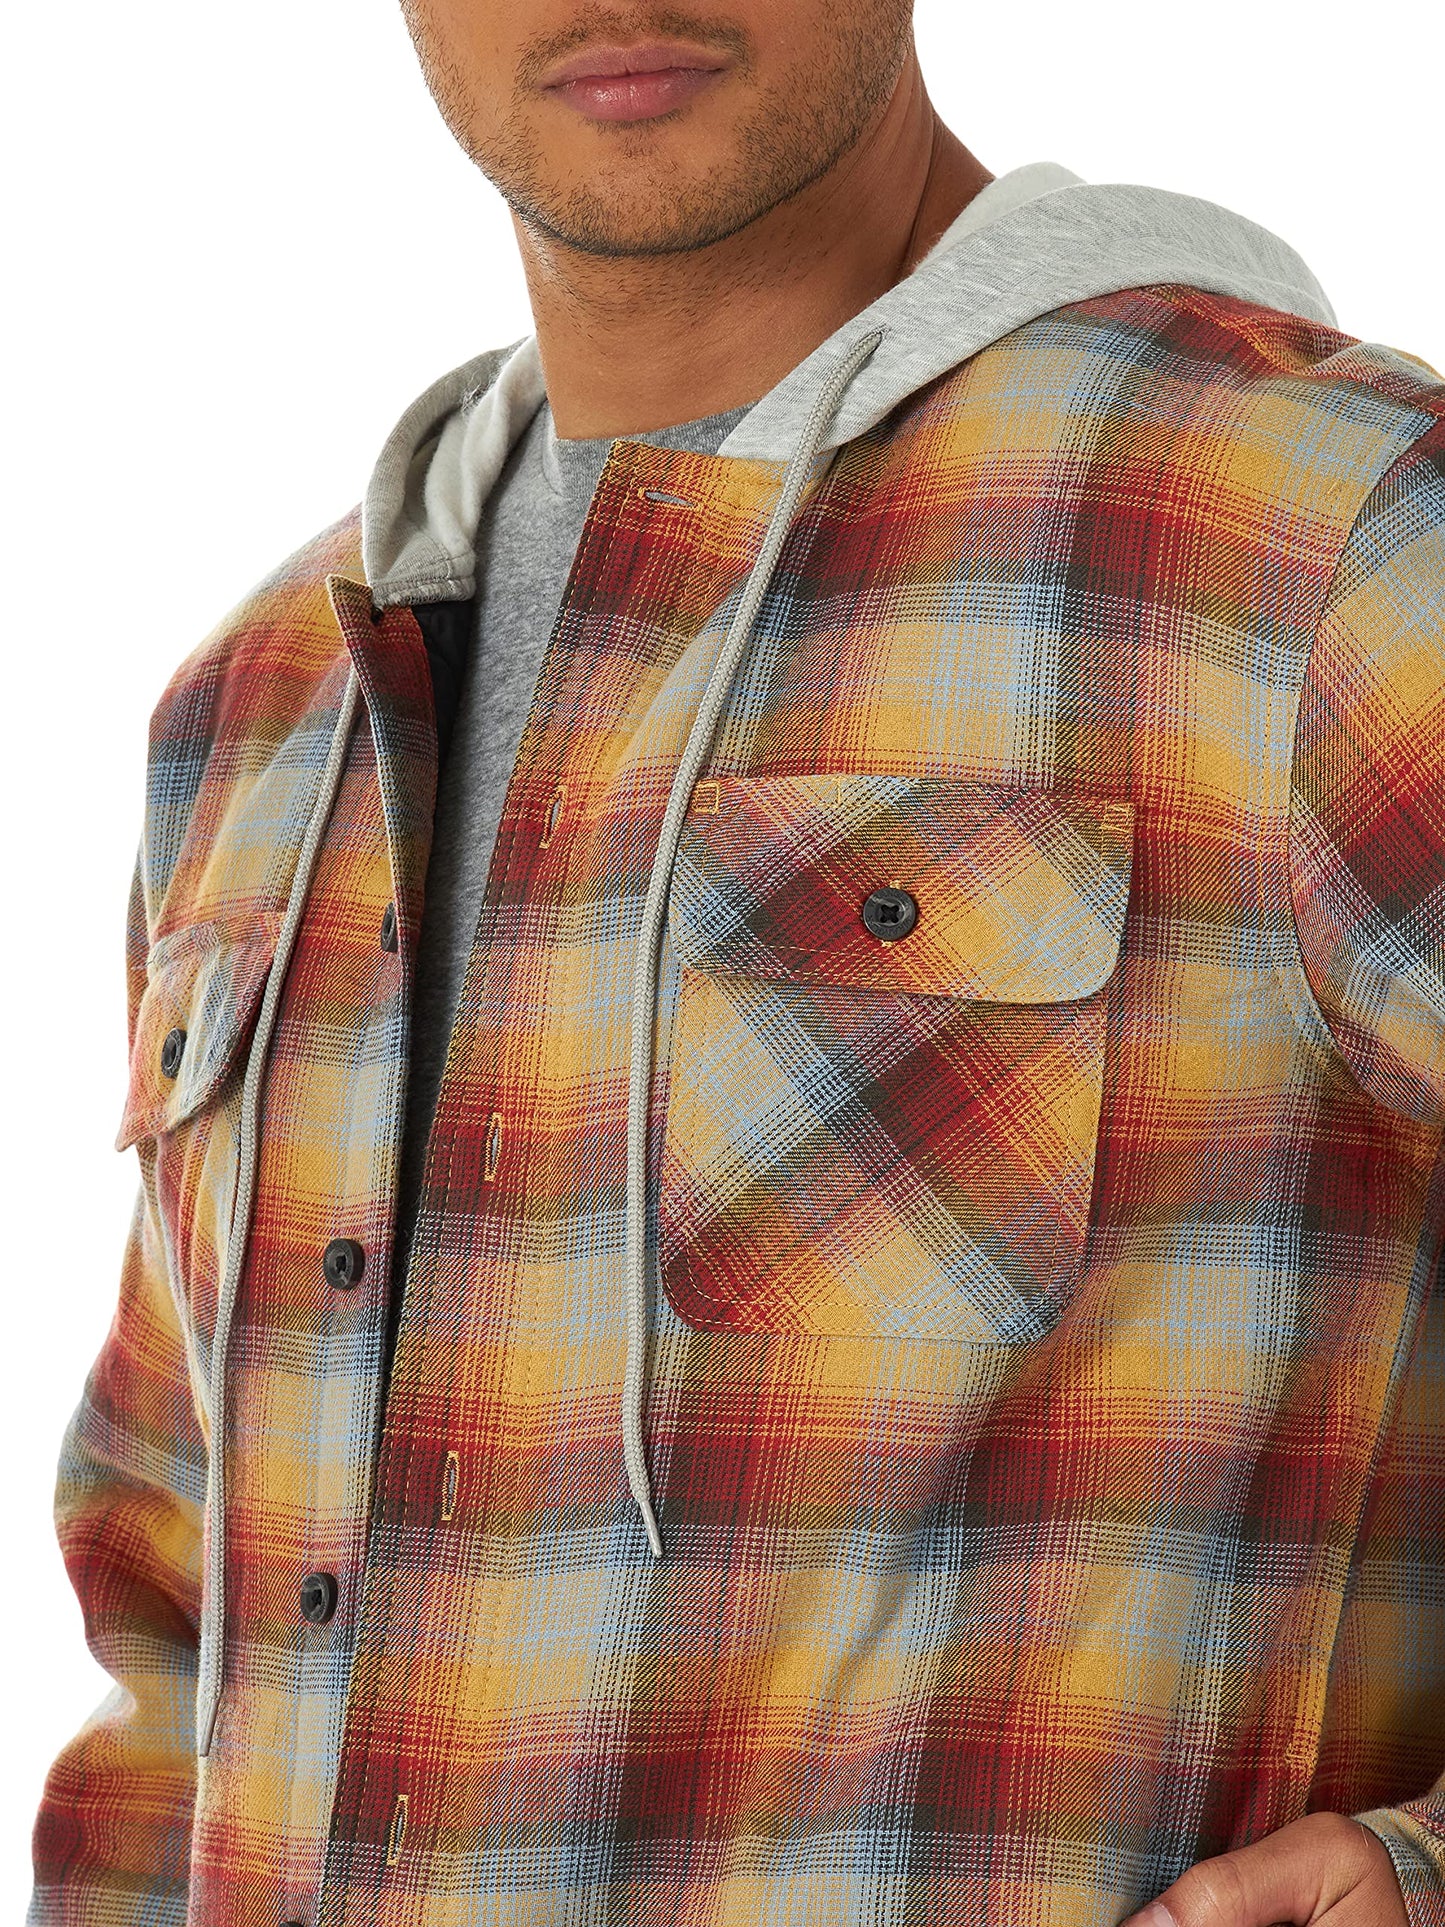 Wrangler Authentics Men's Long Sleeve Quilted Lined Flannel Shirt Jacket with Hood, Red/Yellow, Large